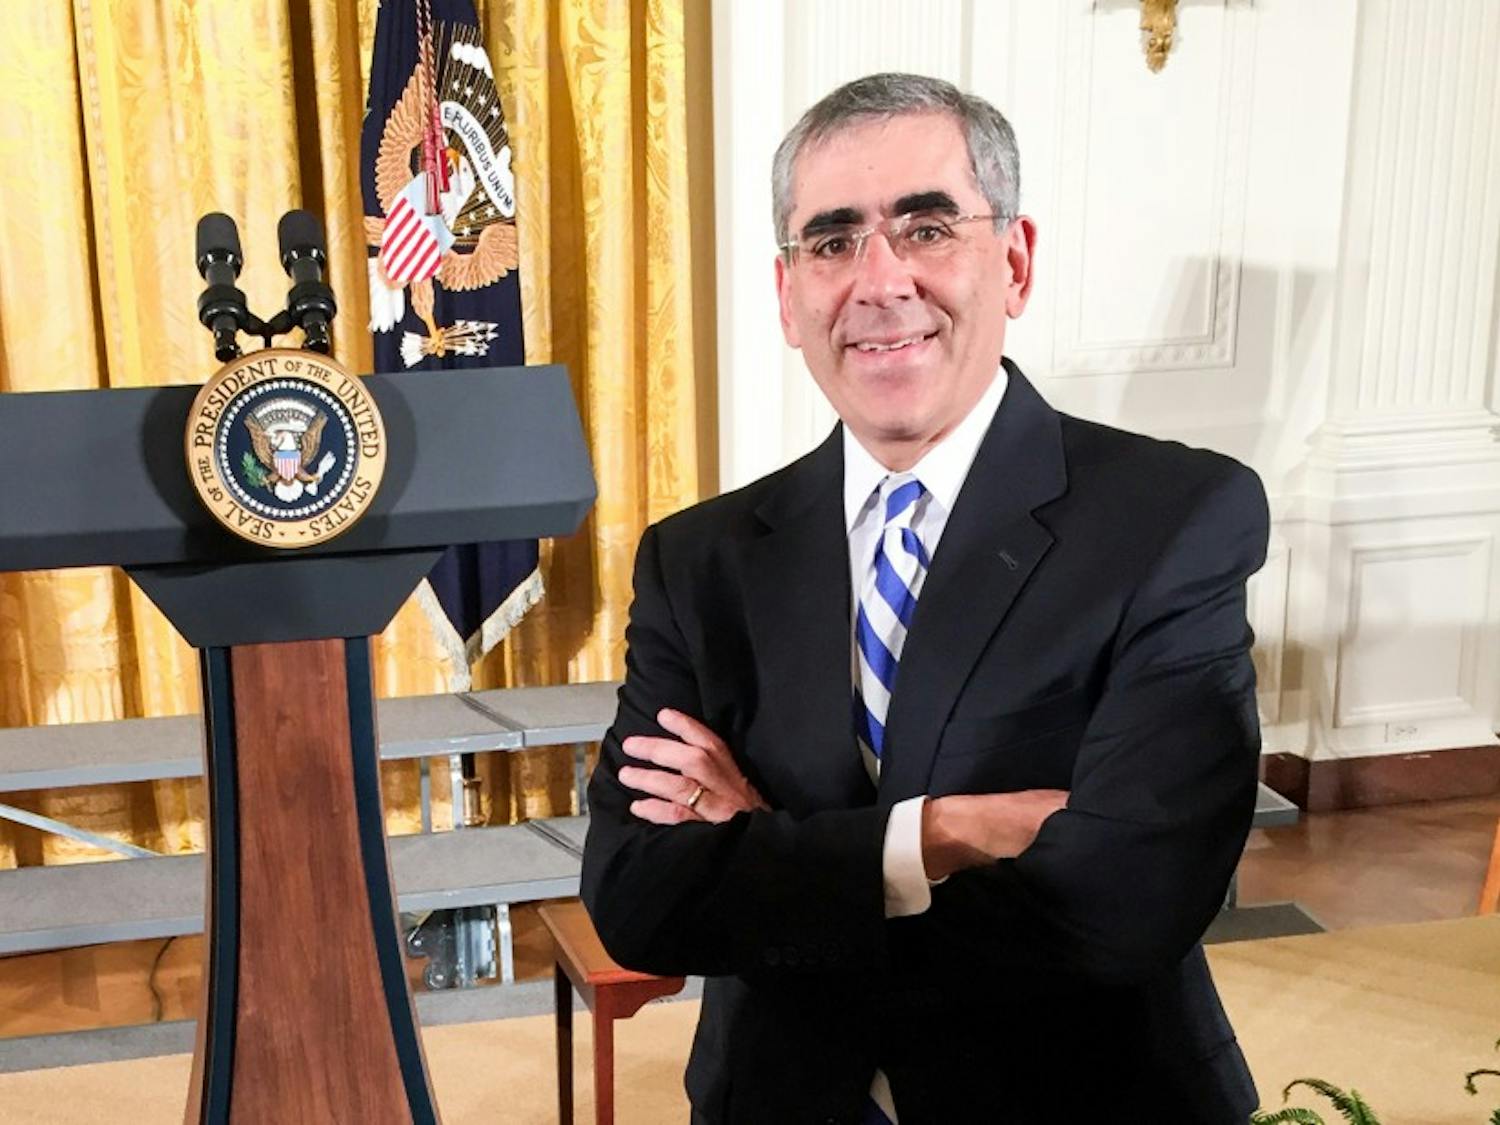 Michael Schoenfeld has served as Duke's vice president for public affairs and government relations since 2008.&nbsp;